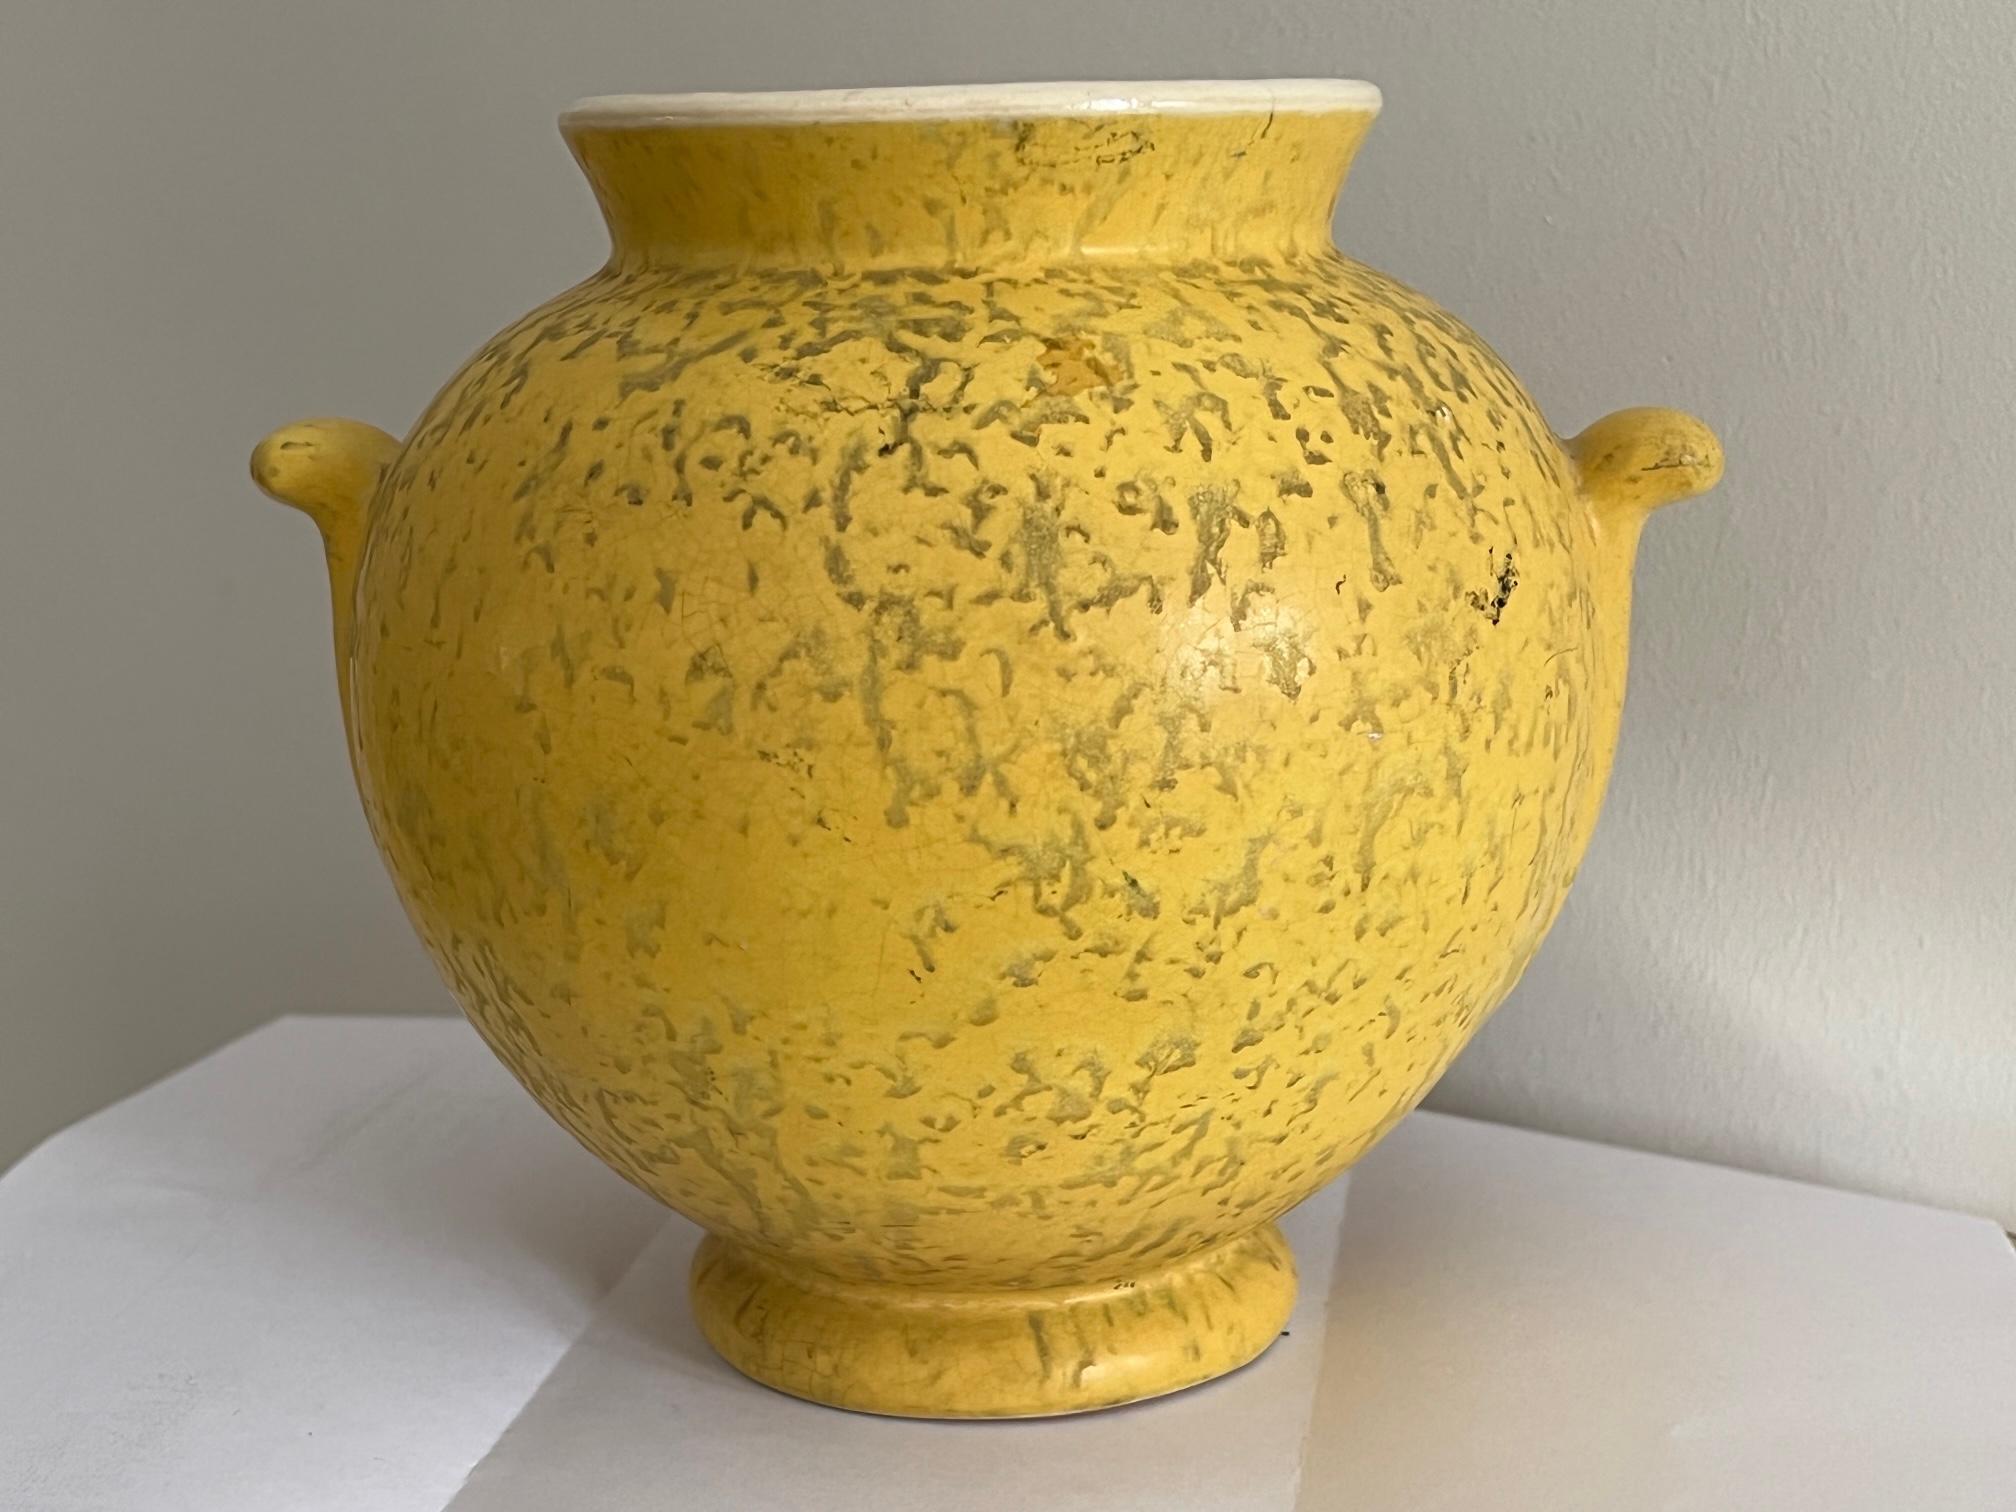 A charming ceramic pot by Weller, signed on the bottom, with handles. Beautiful decoration and yellow glaze.